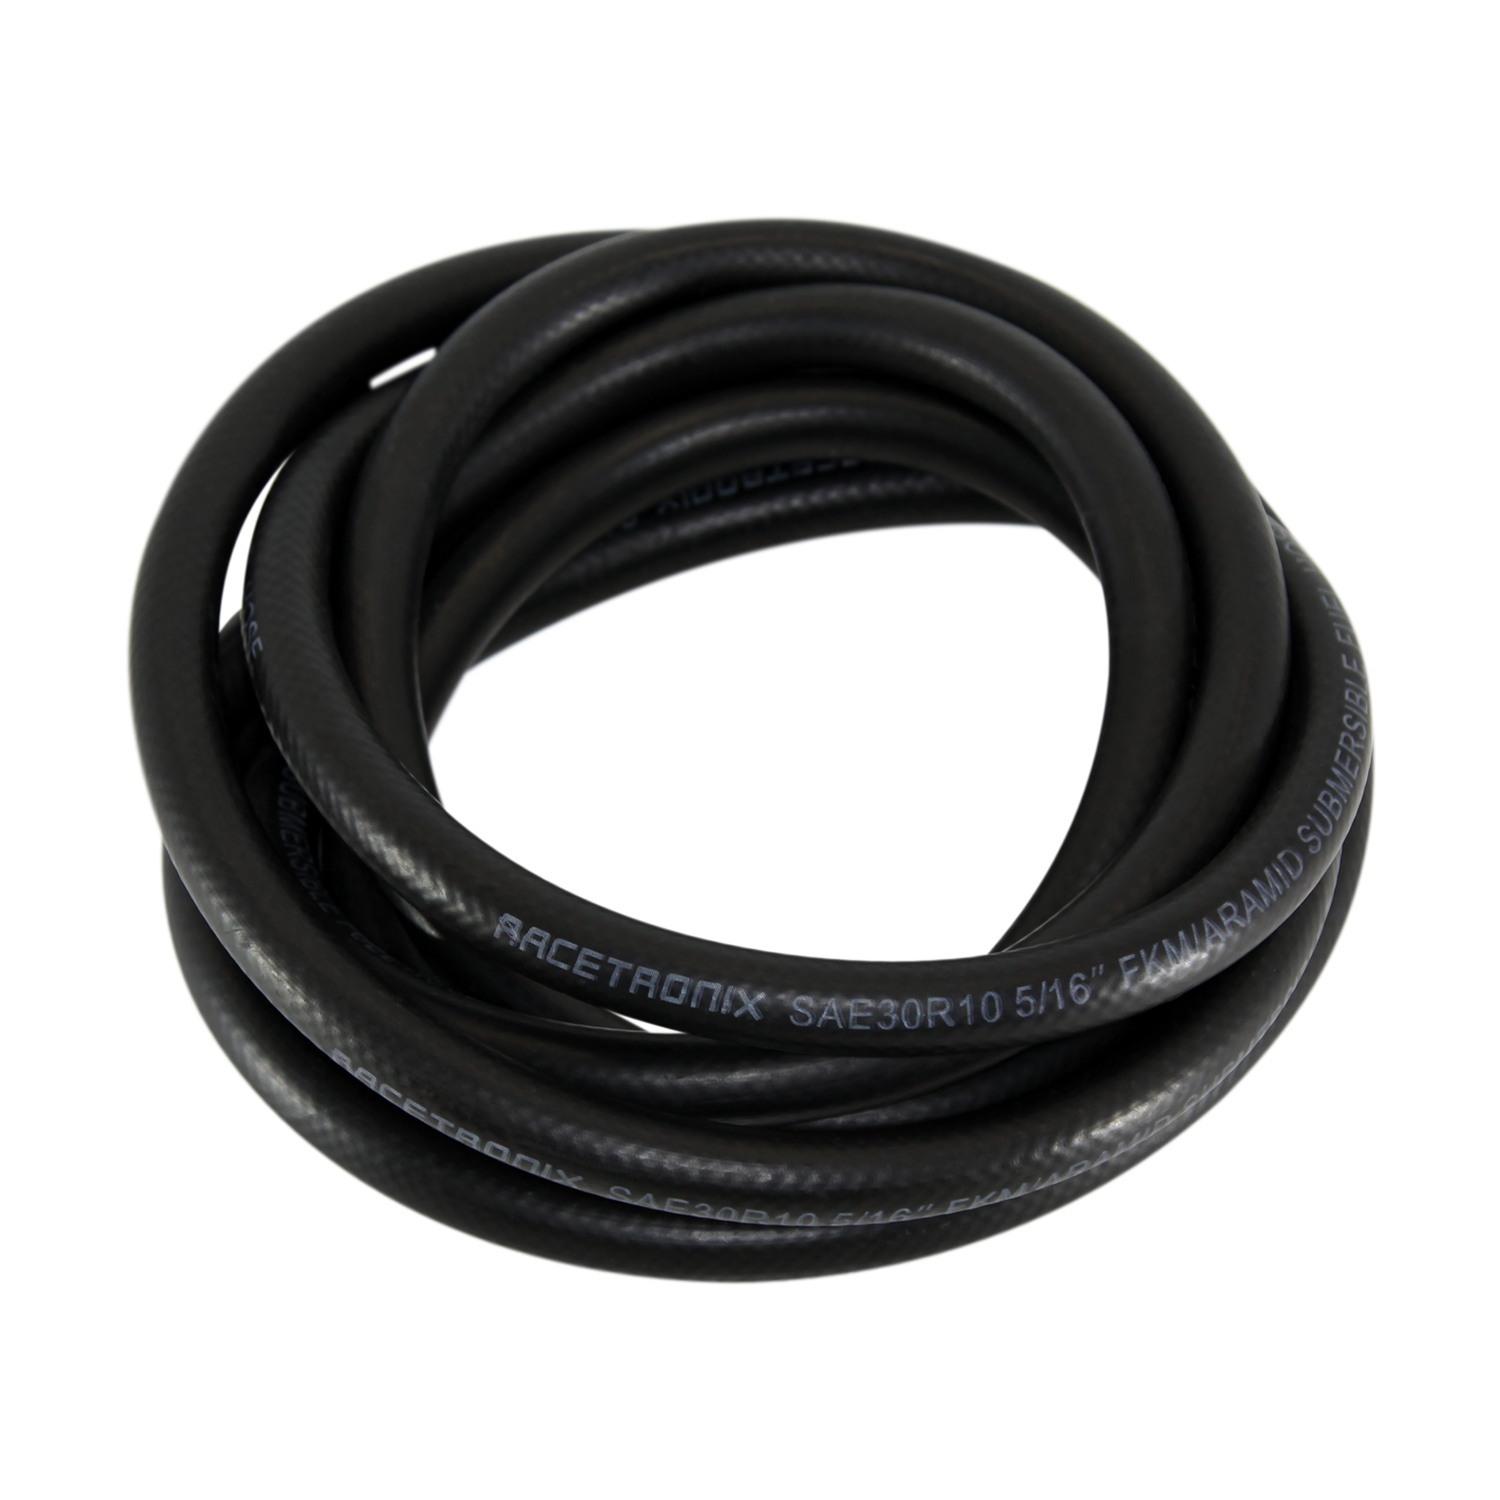 FUEL LINE HOSE 5/16" ID 5 FEET LONG BLACK RUBBER HOSE MADE IN THE USA